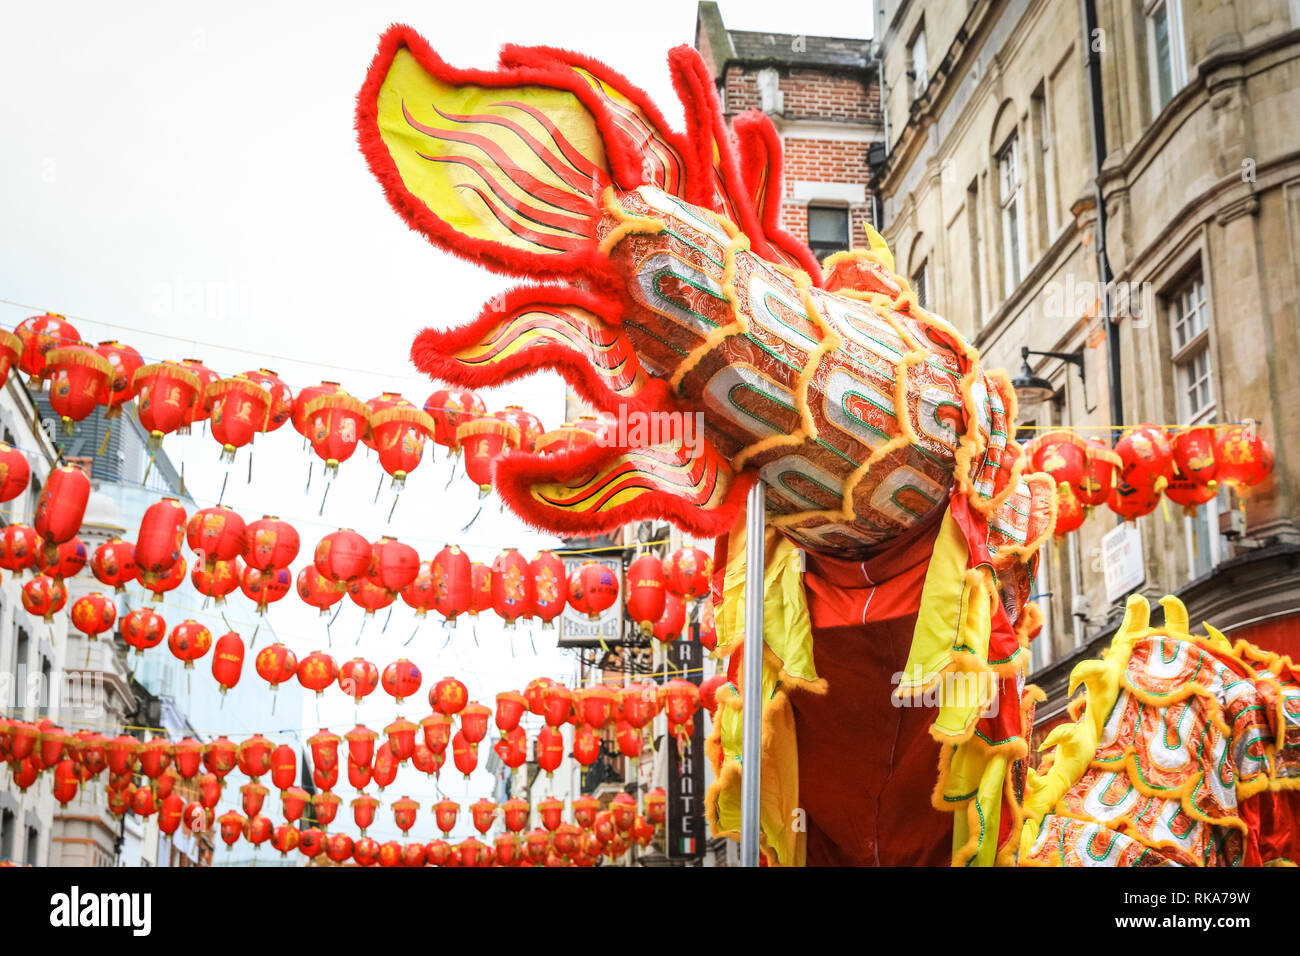 London, UK 10th Feb 2019. The dragon at the front of the procession. The performers make their way through Soho. London's Chinese New Year celebrations, the largest outside Asia, take place with colourful parades, lion and dragon dances, a procession through Soho, cultural performances and displays in and around Chinatown, the West End and Trafalgar Square. 2019 welcomes the Year of the Pig. Credit: Imageplotter News and Sports/Alamy Live News Stock Photo